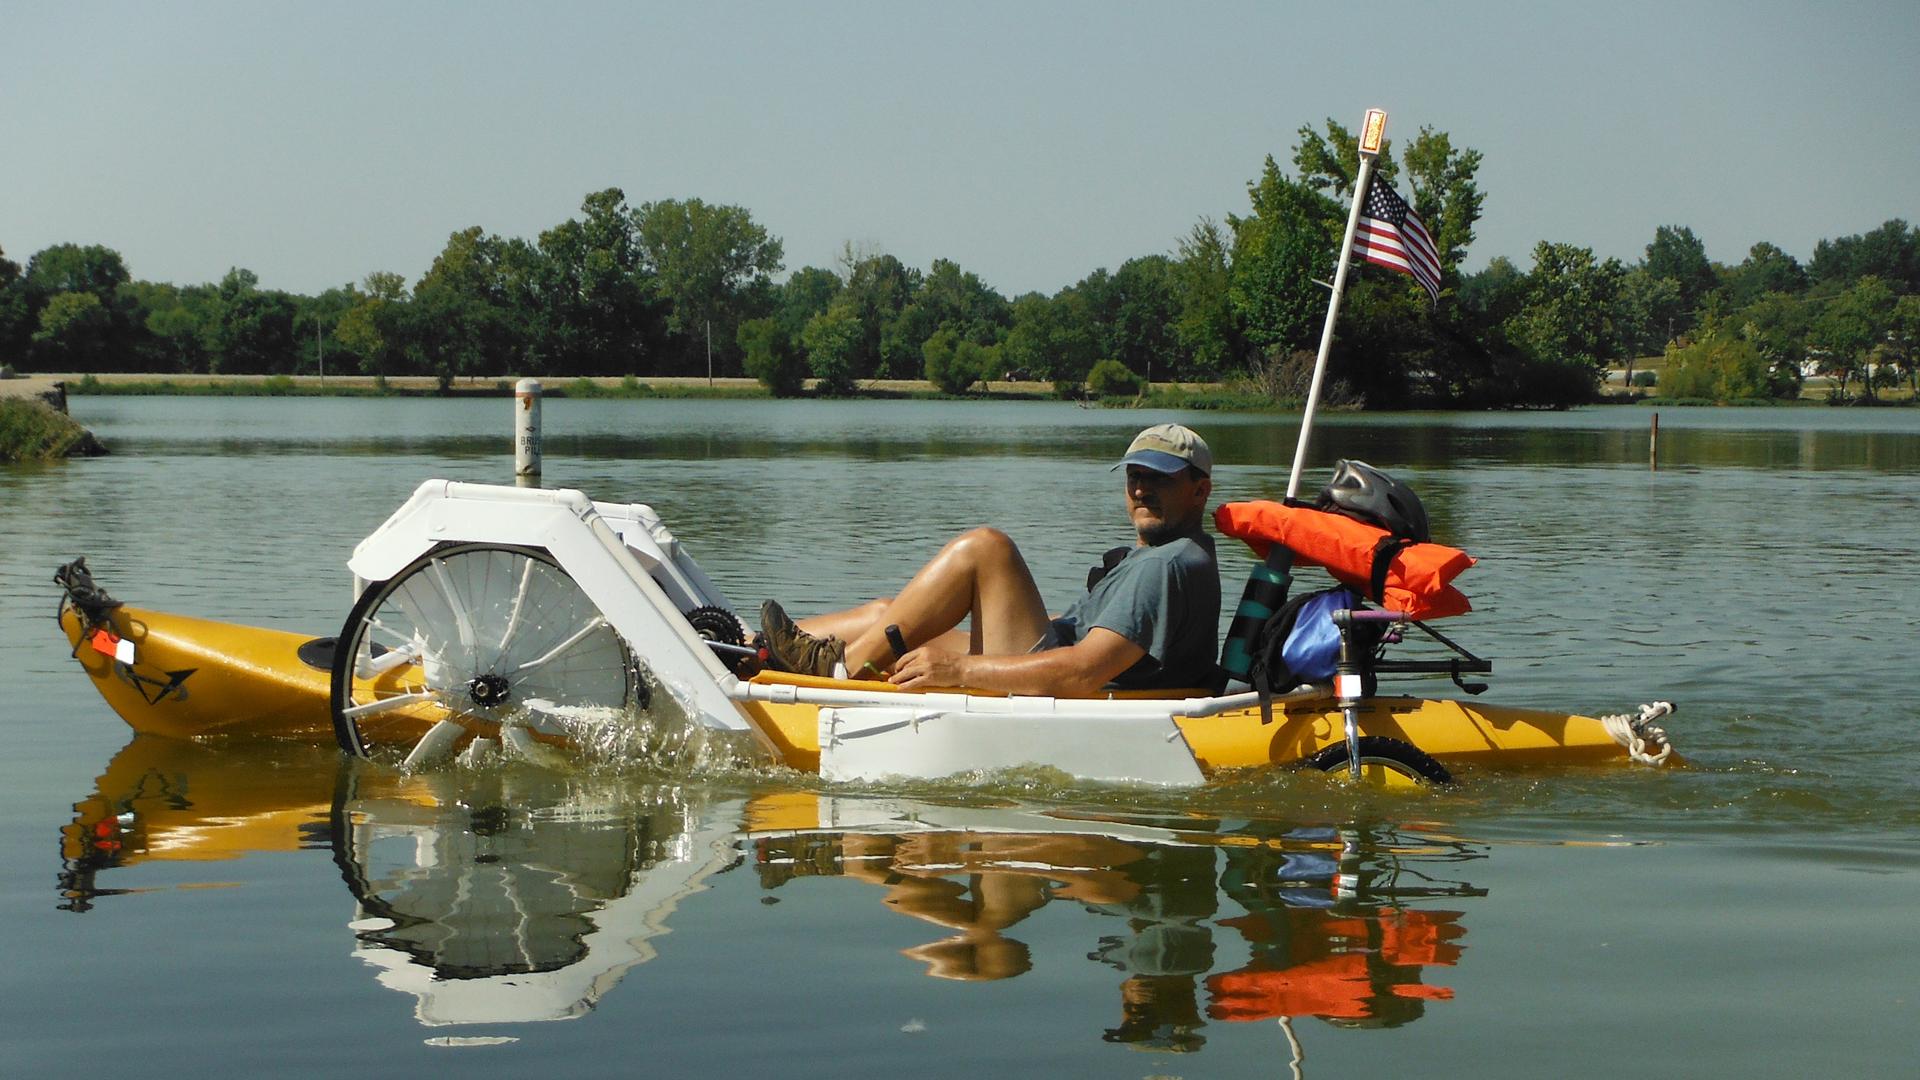 The Quadyak -- part bike, part boat. Randy Ridings came up with the idea to solve a nagging problem.